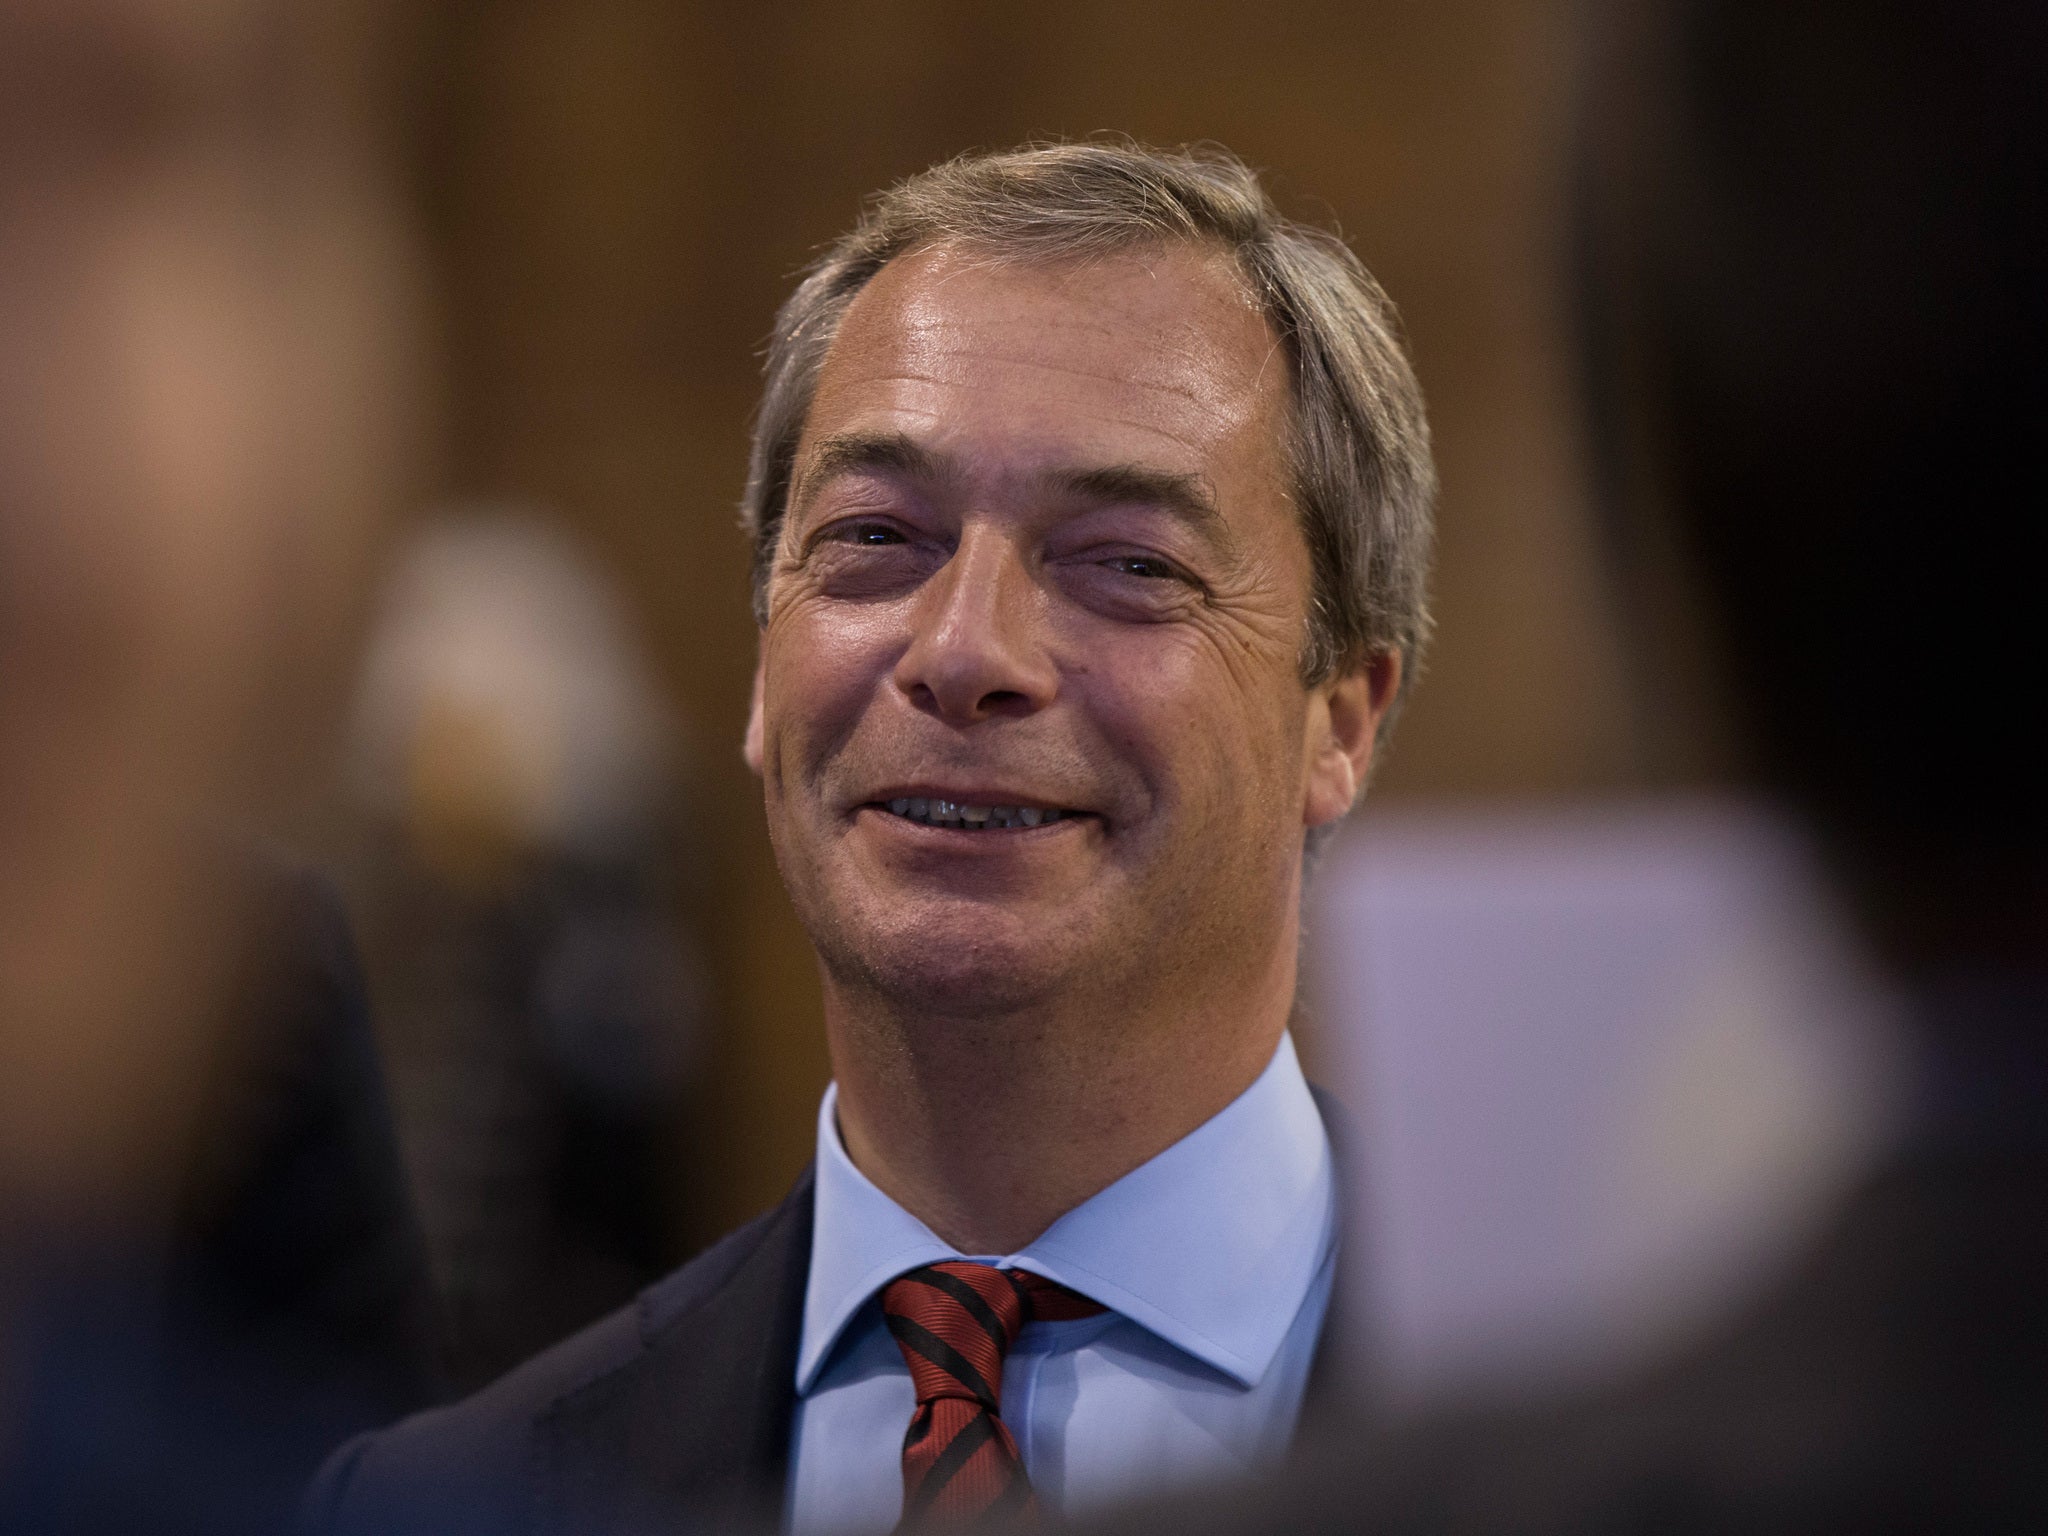 Ukip leader Nigel Farage inspired the strongest feelings in voters, though many of them were negative. Source: Getty Images